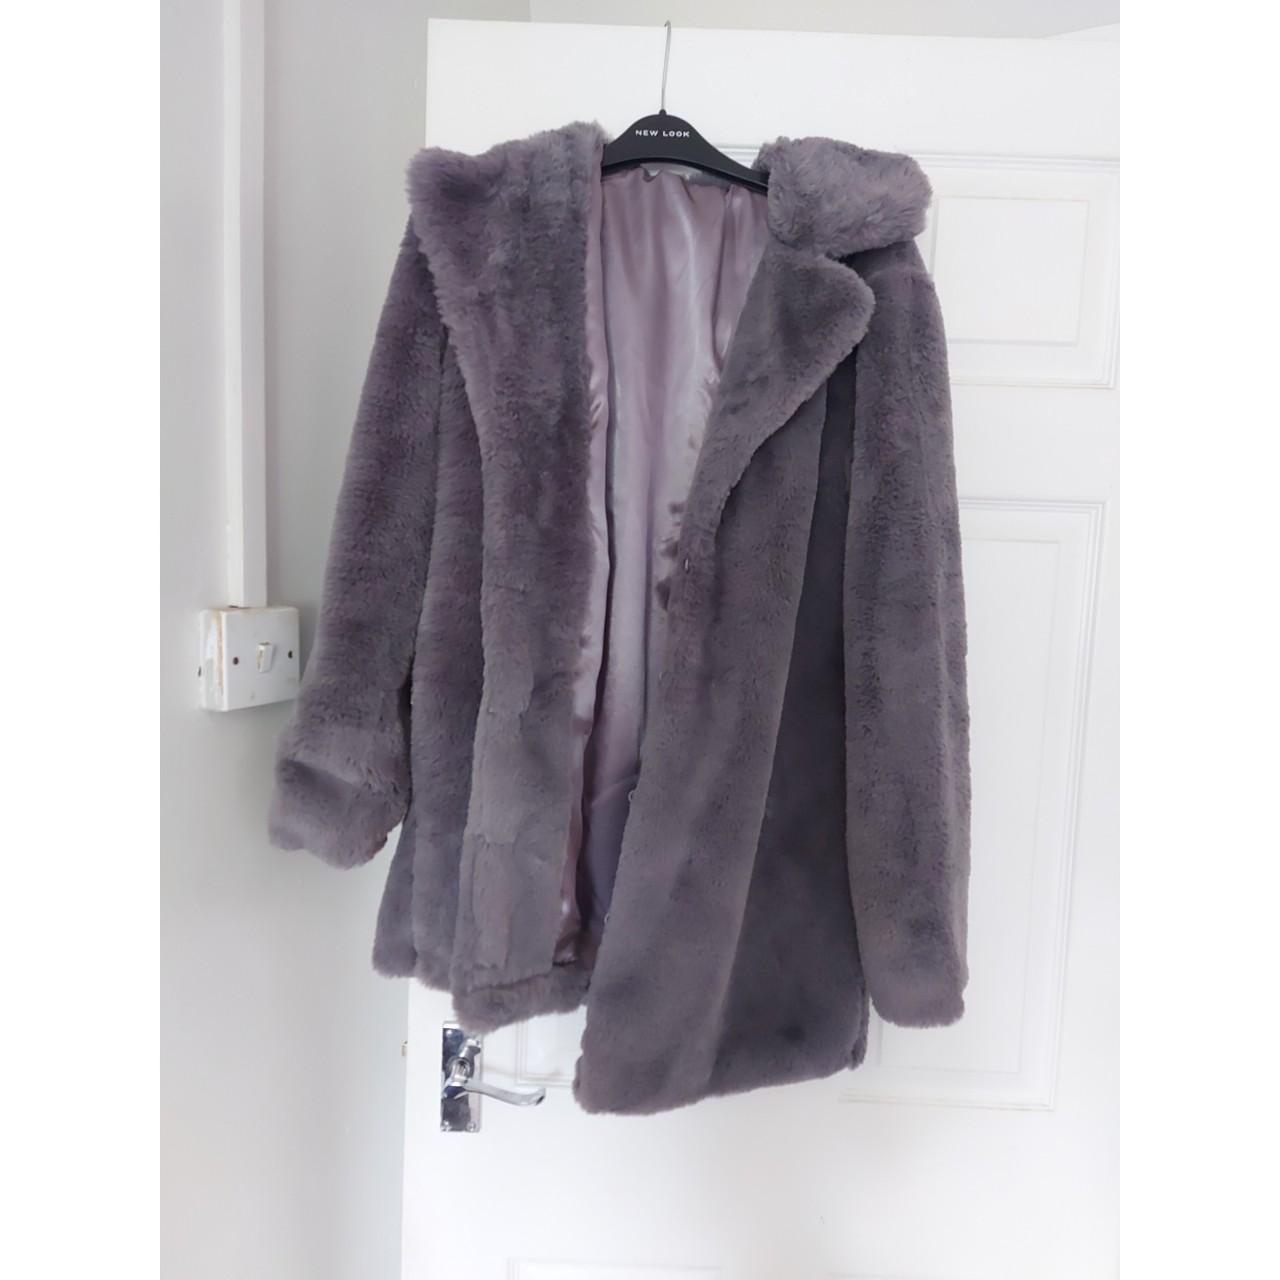 Winter faux fur grey coat, great condition only worn... - Depop